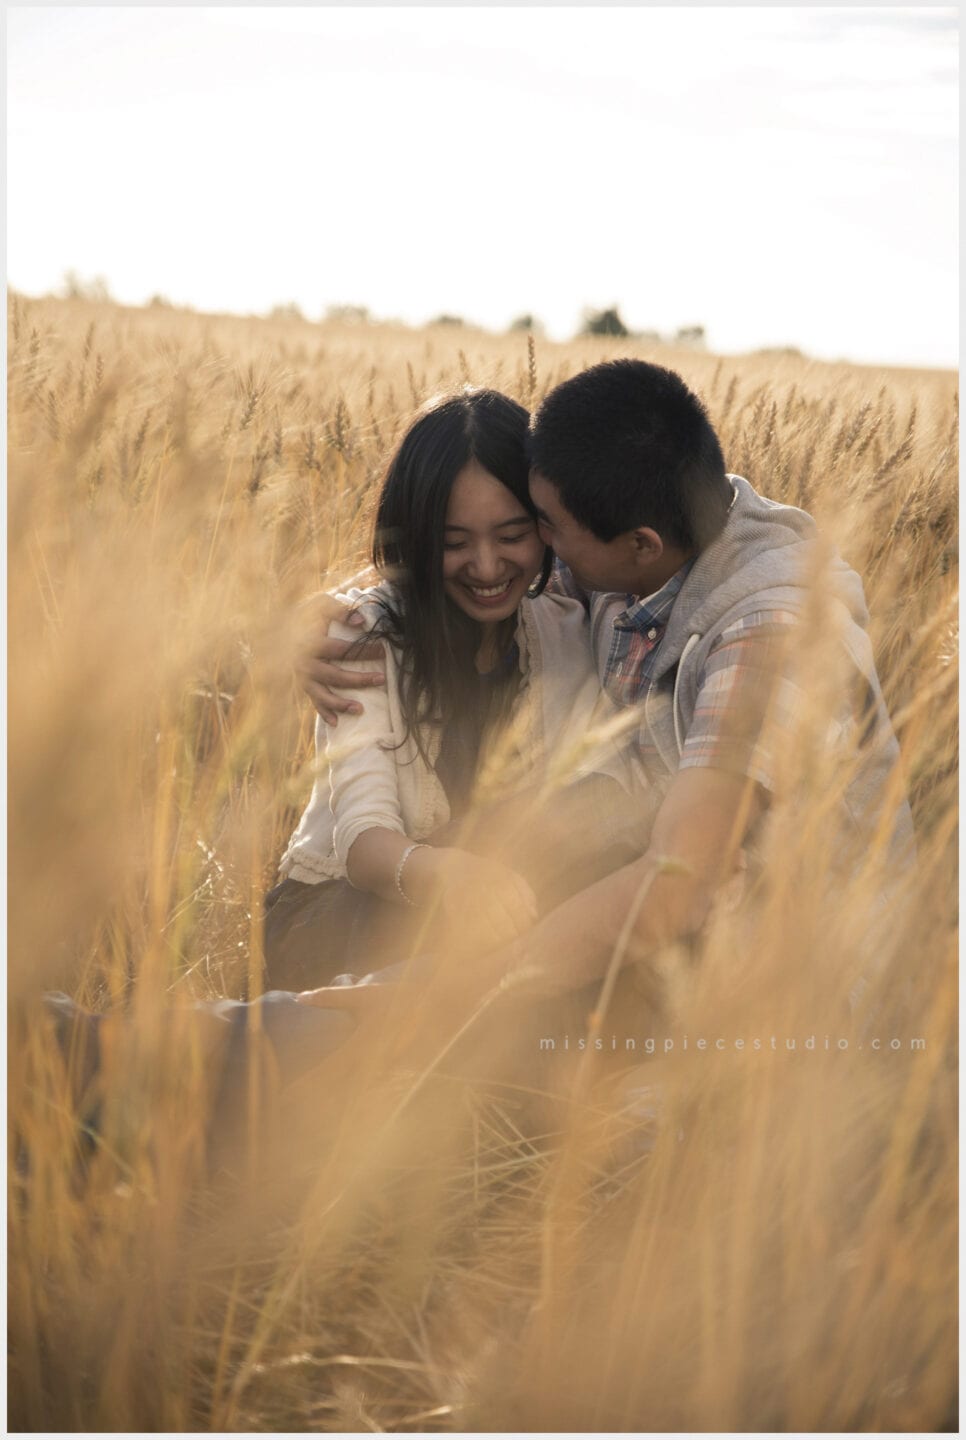 a couple whispering into each other at a picnic in a wheat field